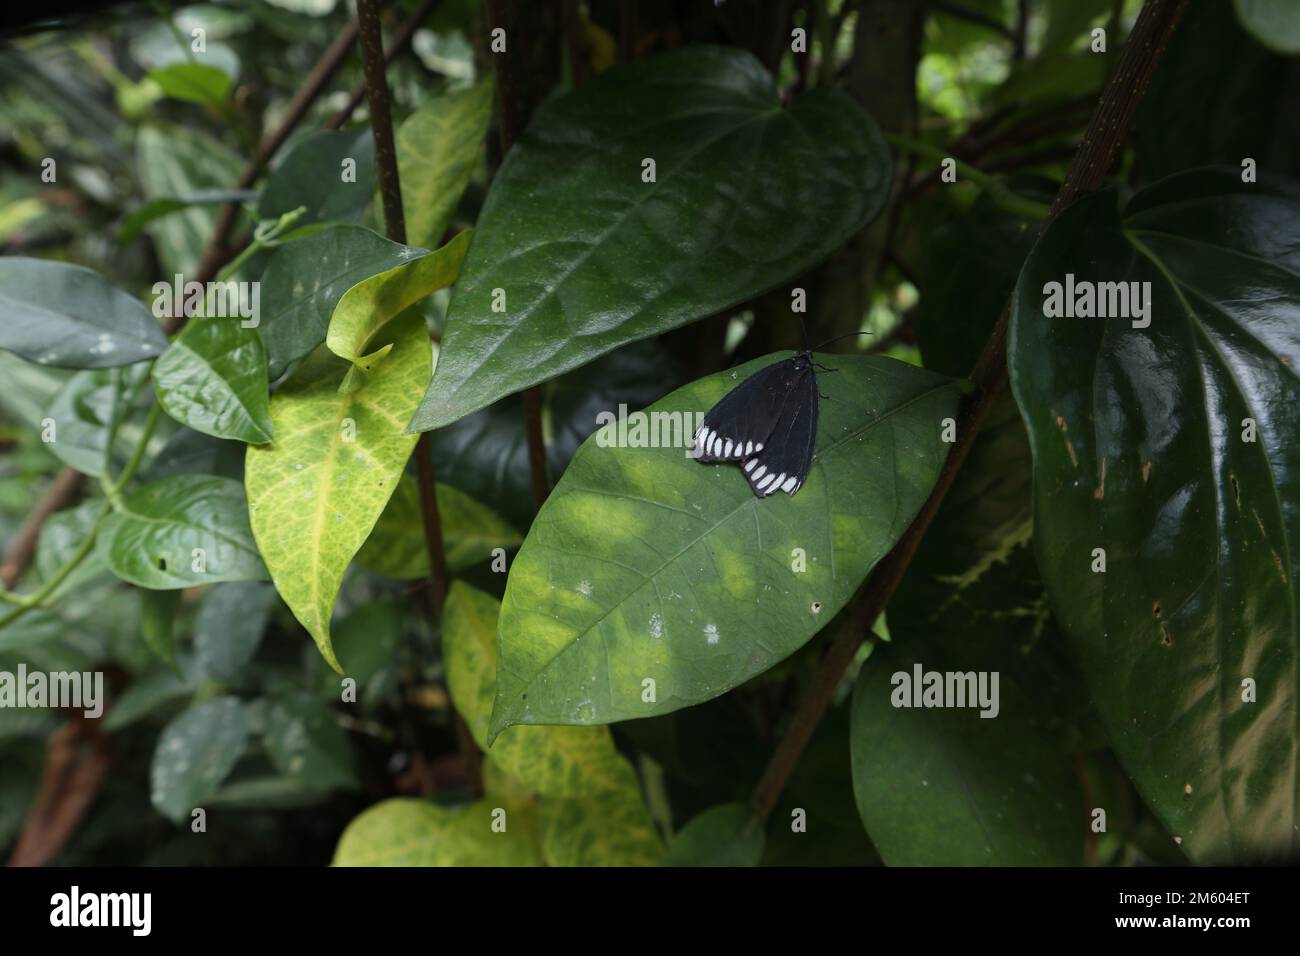 A triangular shape black moth with white spots was perched on top of a green leaf in a wild area Stock Photo